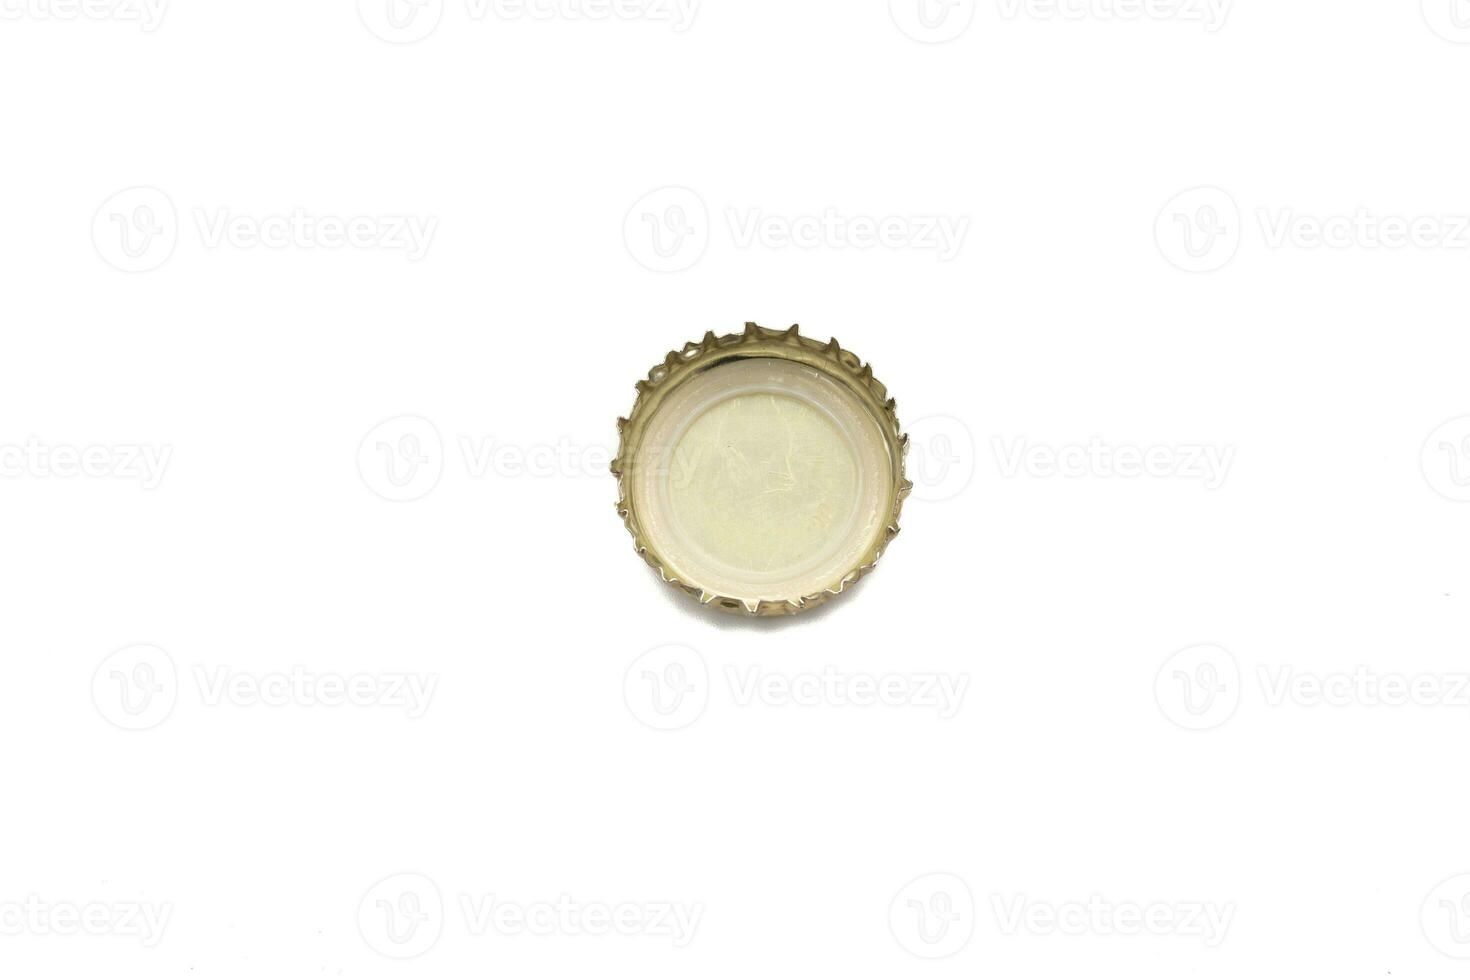 Gold colored beer bottle cap, to open and close. Isolated on white background. photo